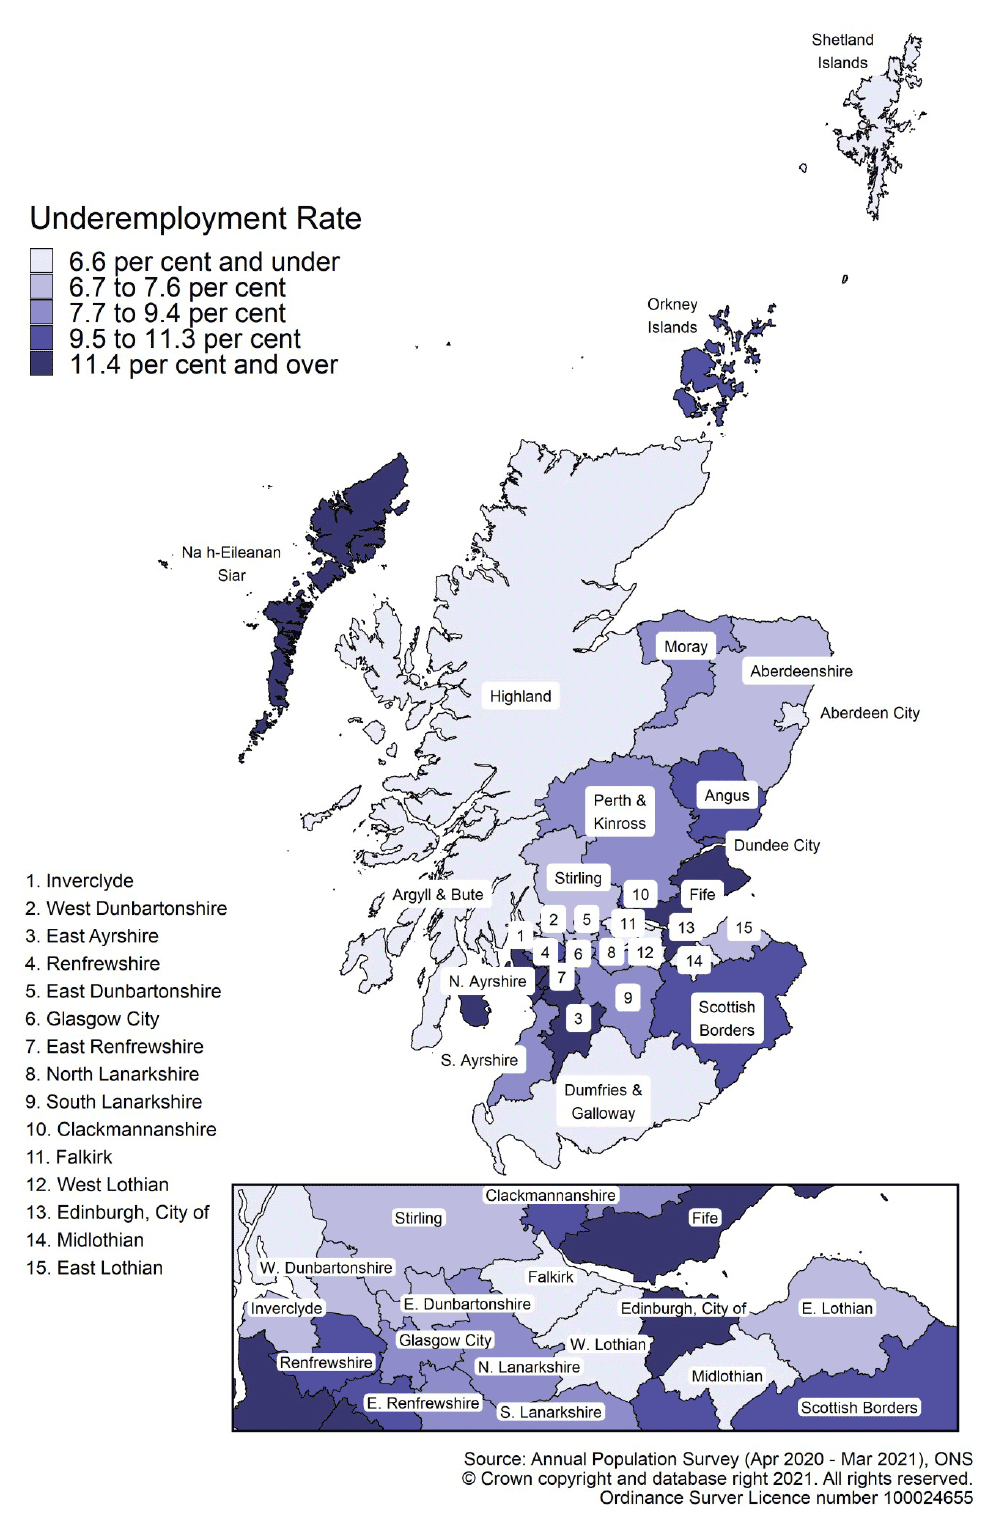 Map of Scotland showing underemployment rate ranges by local authority area for ages 16 and over in April 2020 - March 2021